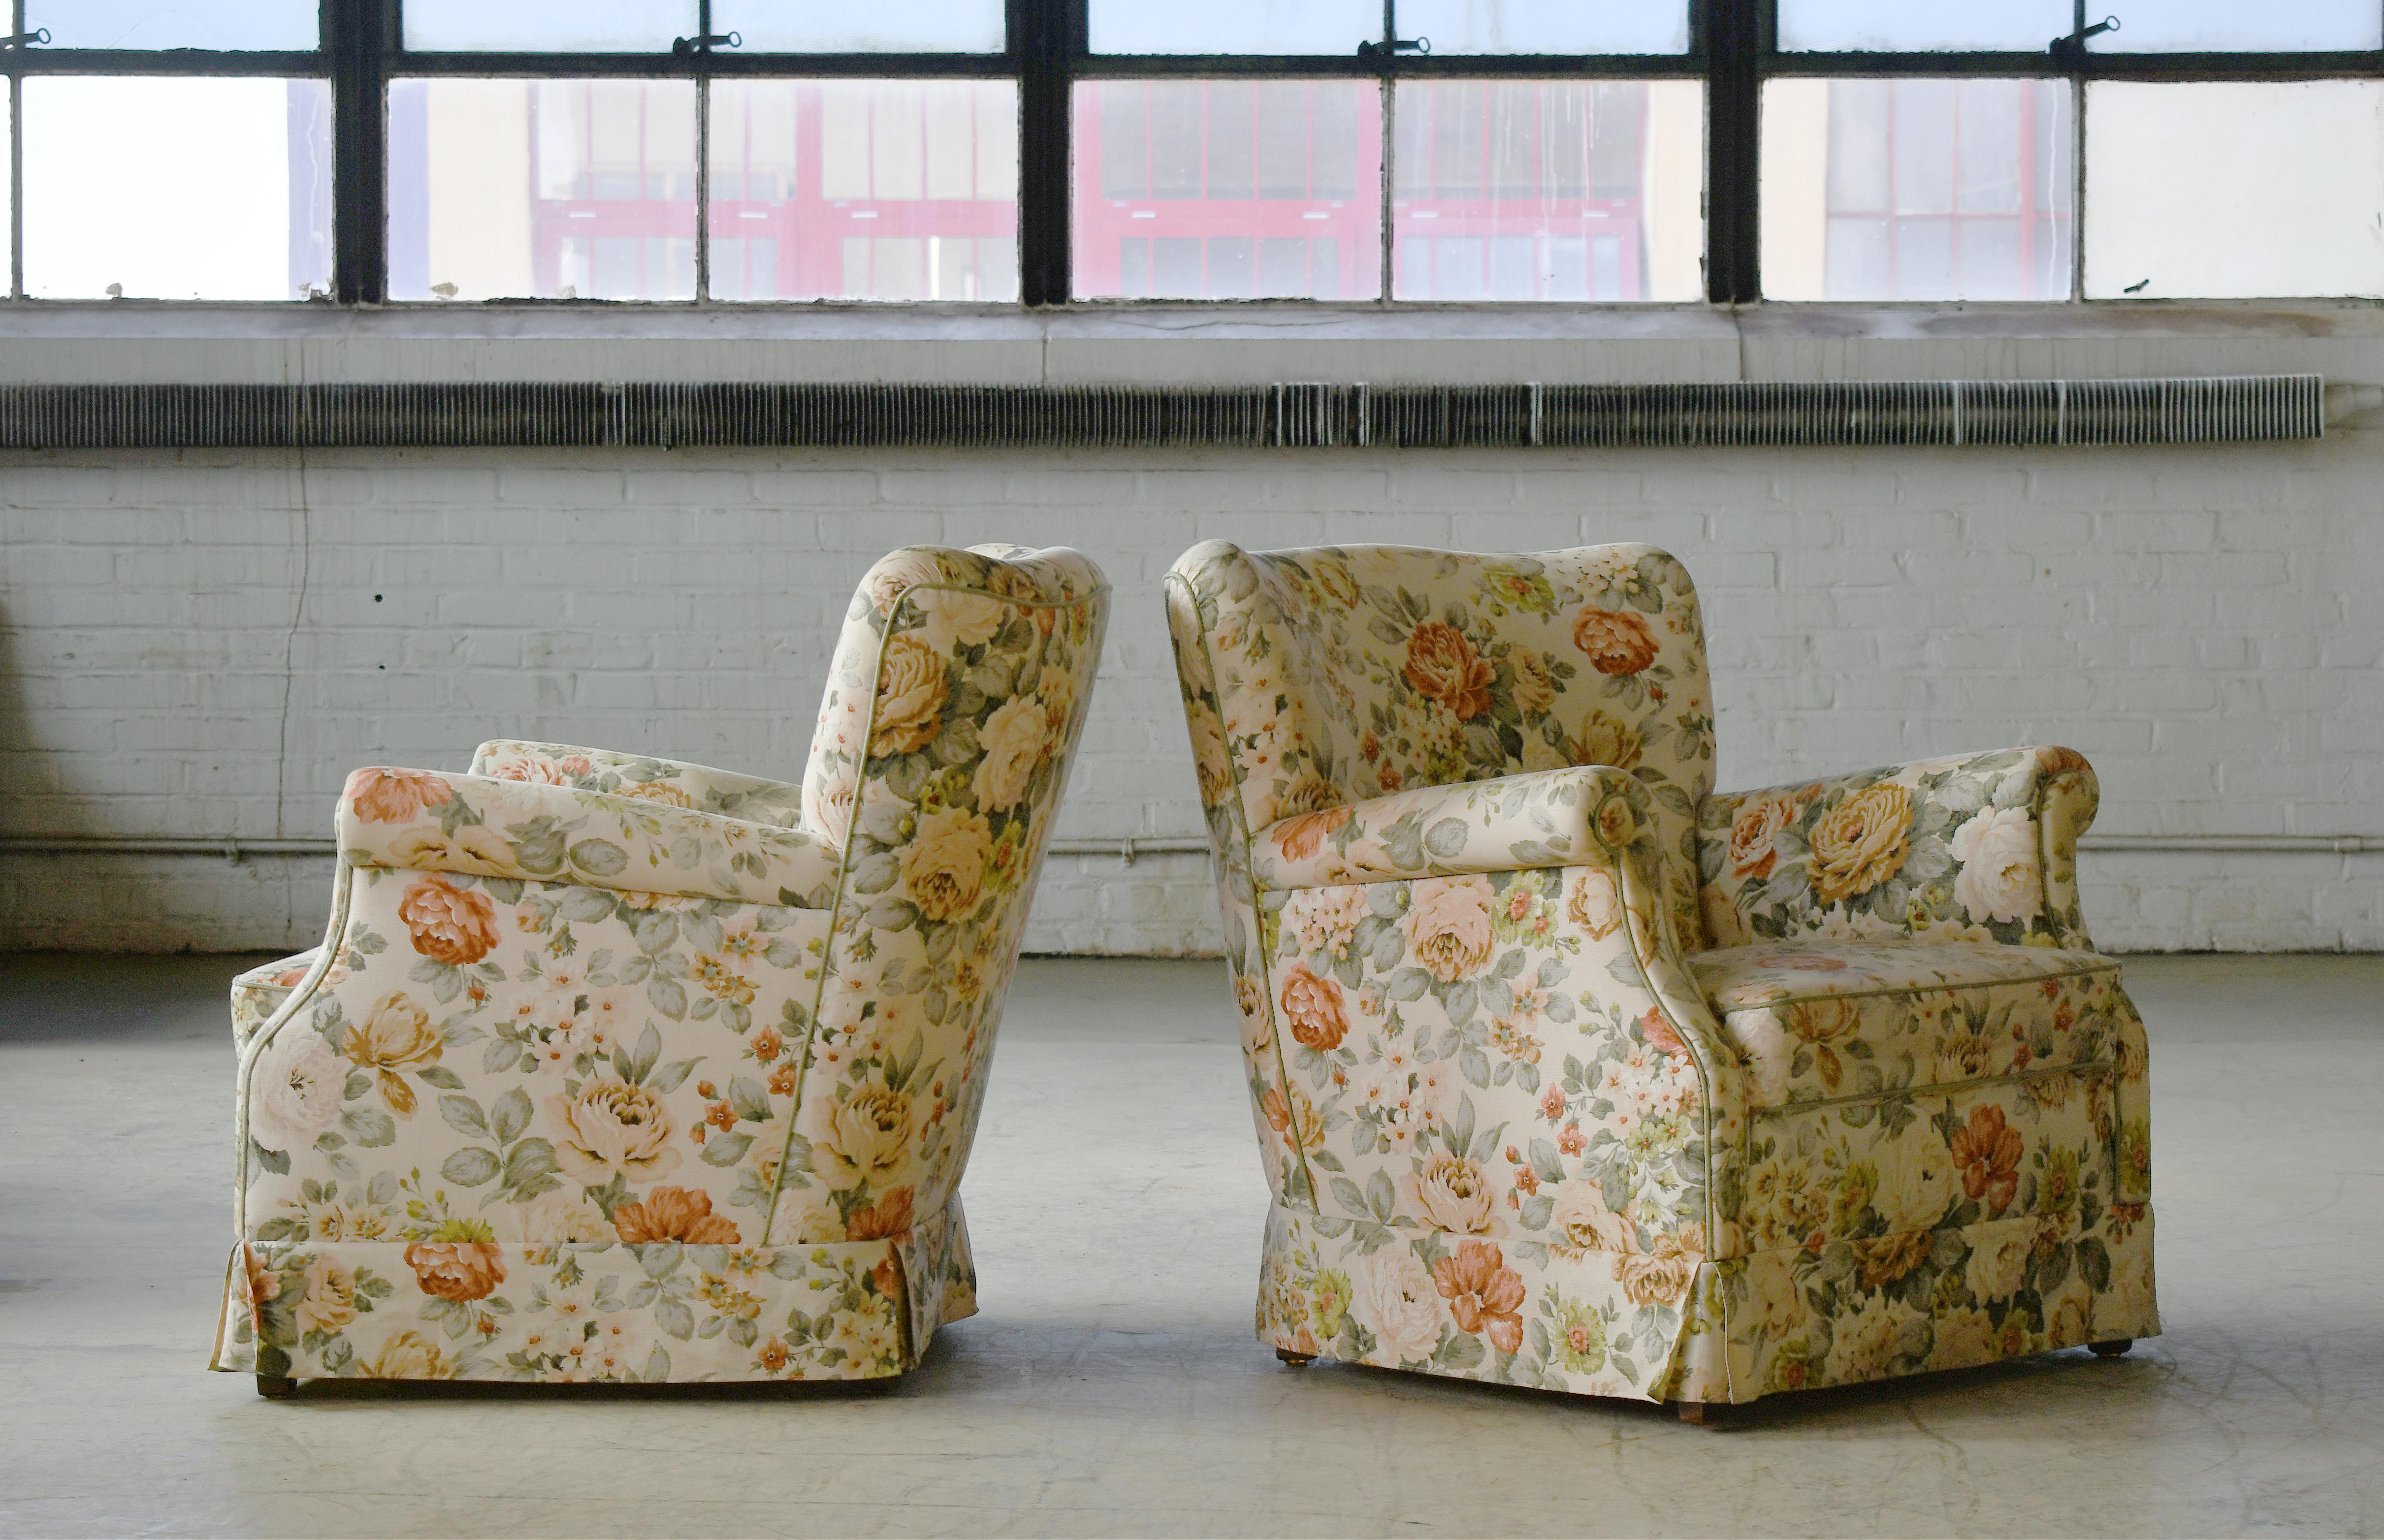 Pair of Danish 1950s Medium Size Lounge Chairs in Floral Fabric and Skirts In Good Condition For Sale In Bridgeport, CT